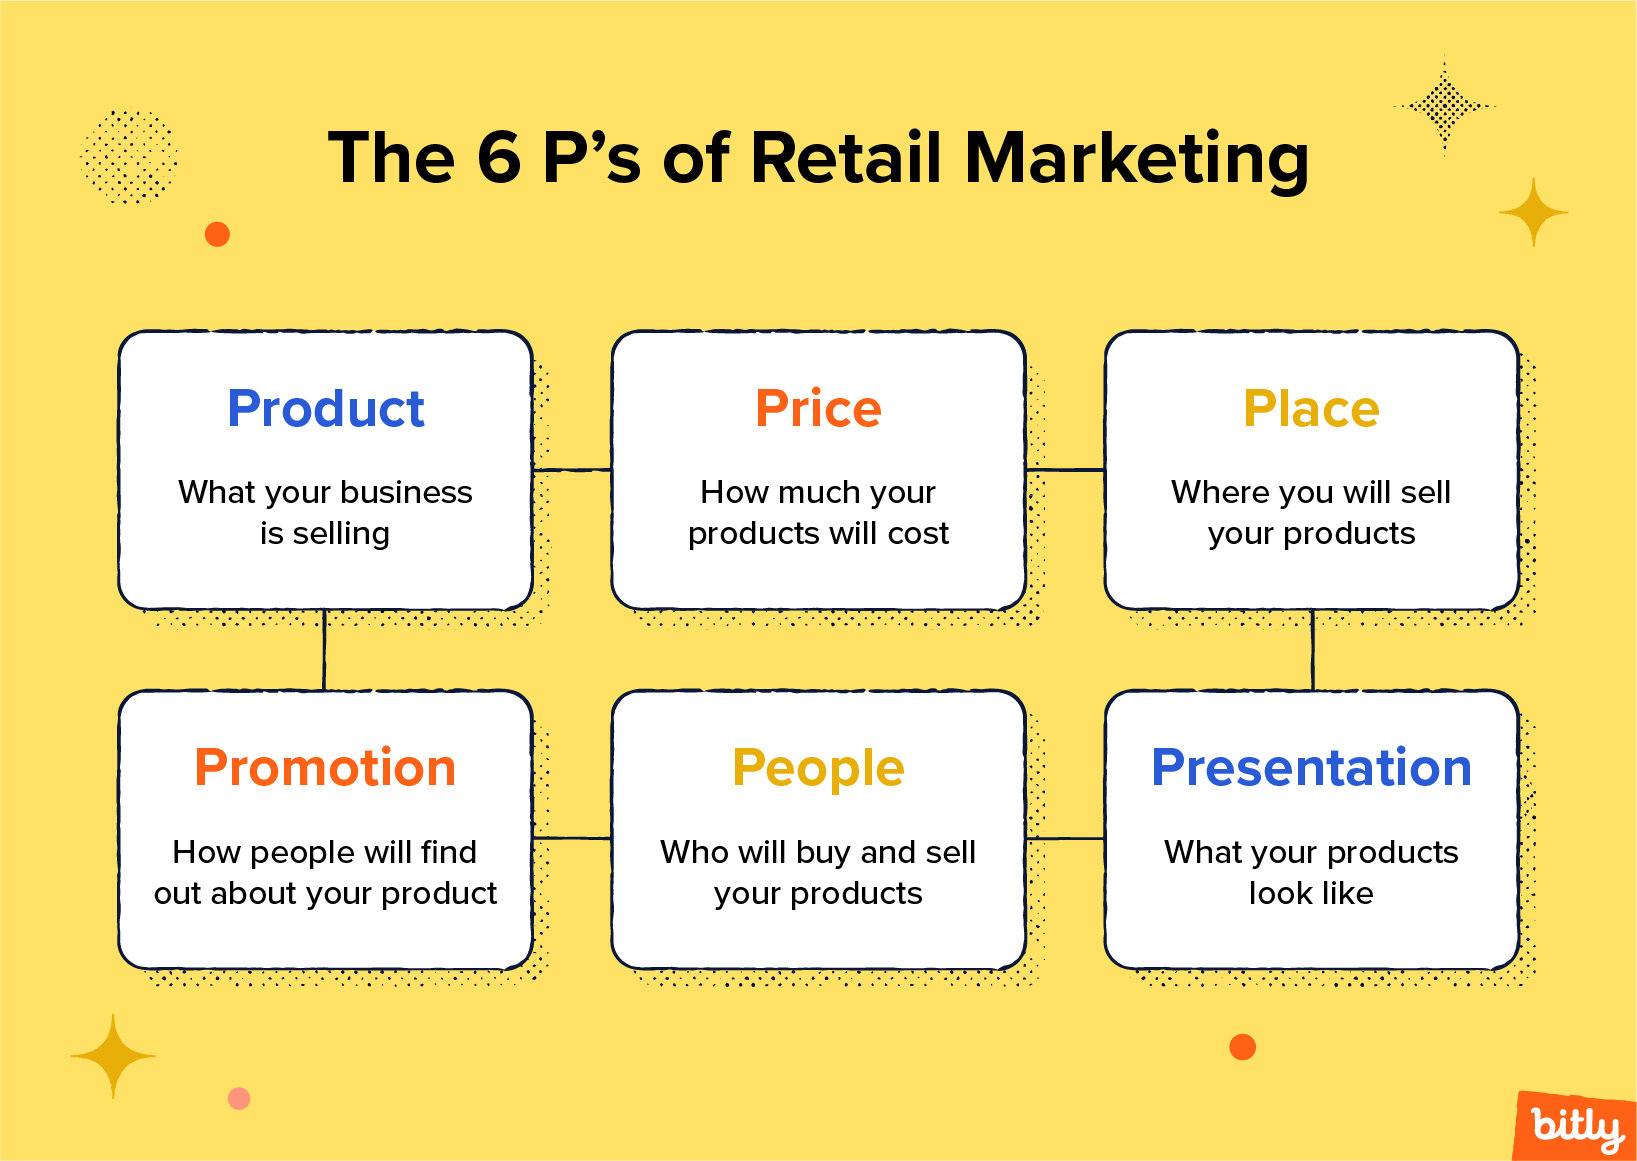 graphic depicting the 6 Ps of retail marketing and their definitions